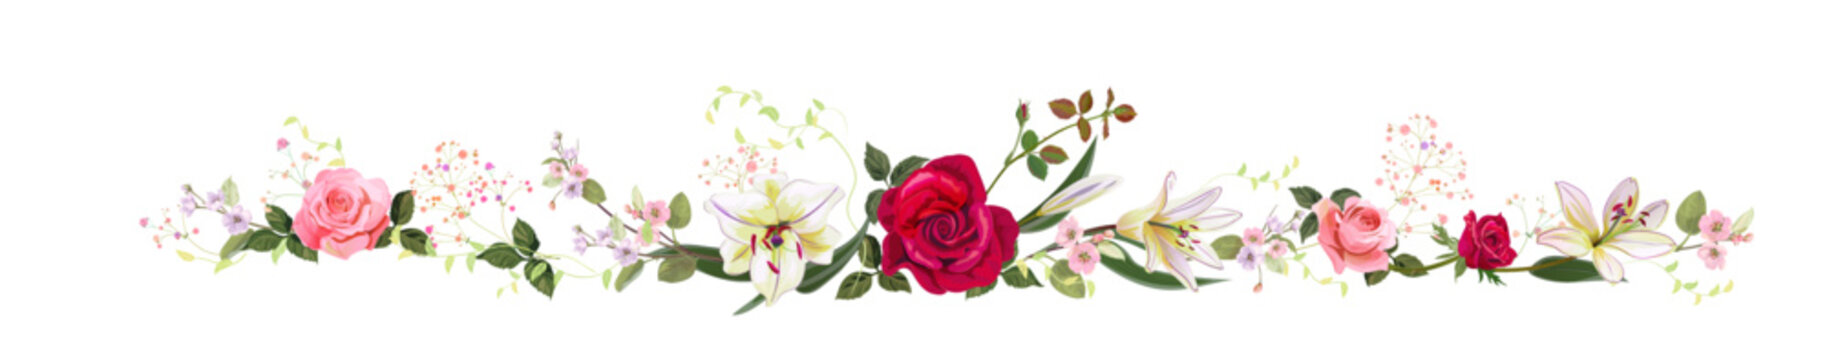 Panoramic view with pink, red roses, white lilies, spring blossom. Horizontal border for Valentine's Day: flowers, buds, leaves on white background, digital draw, vintage watercolor style, vector